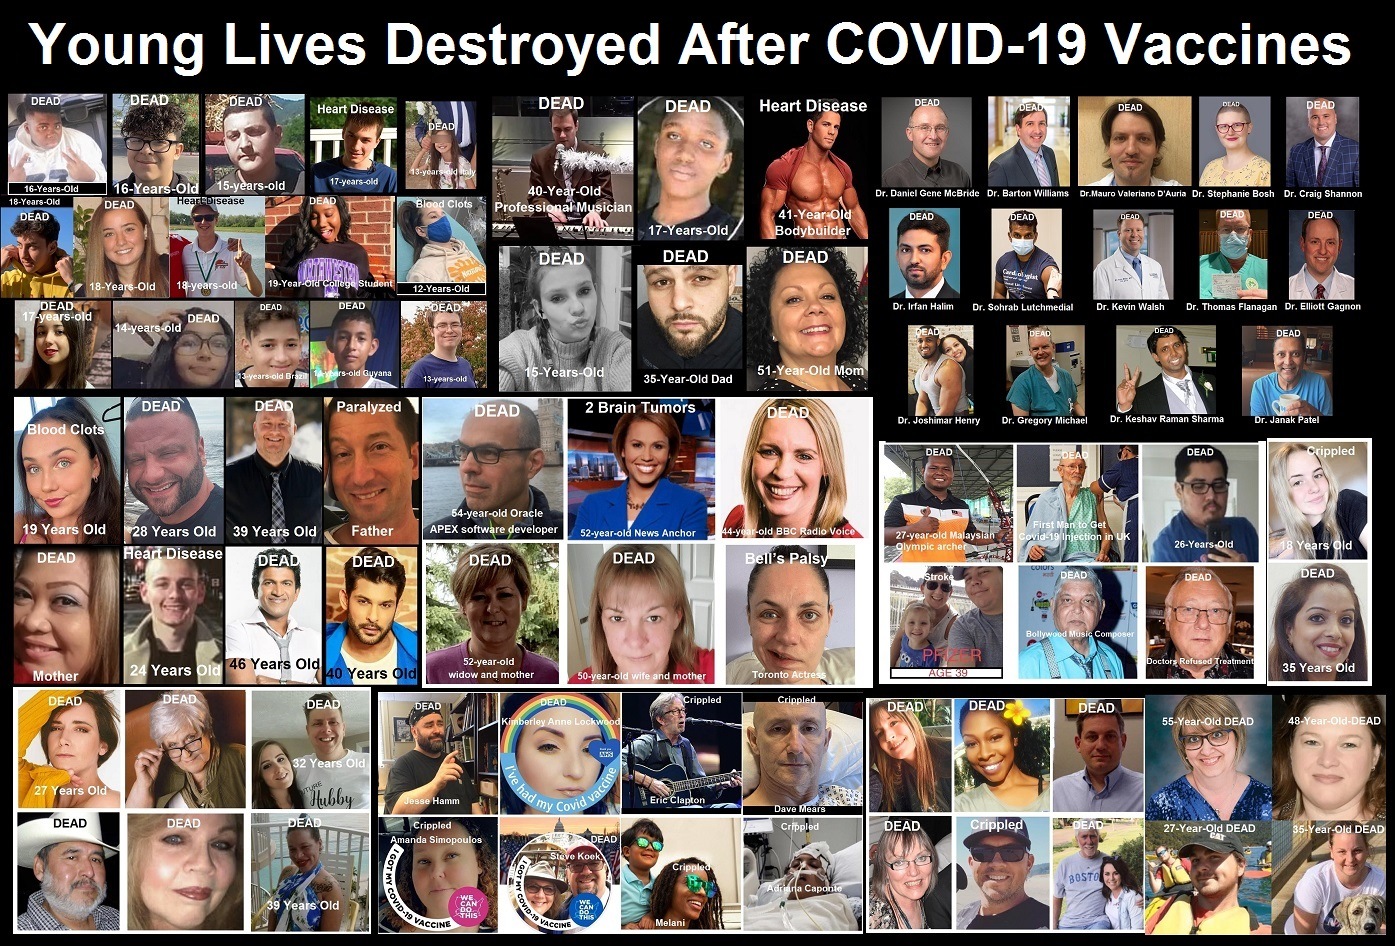 You-Lives-destroyed-from-COVID-Vaccines (1).jpg